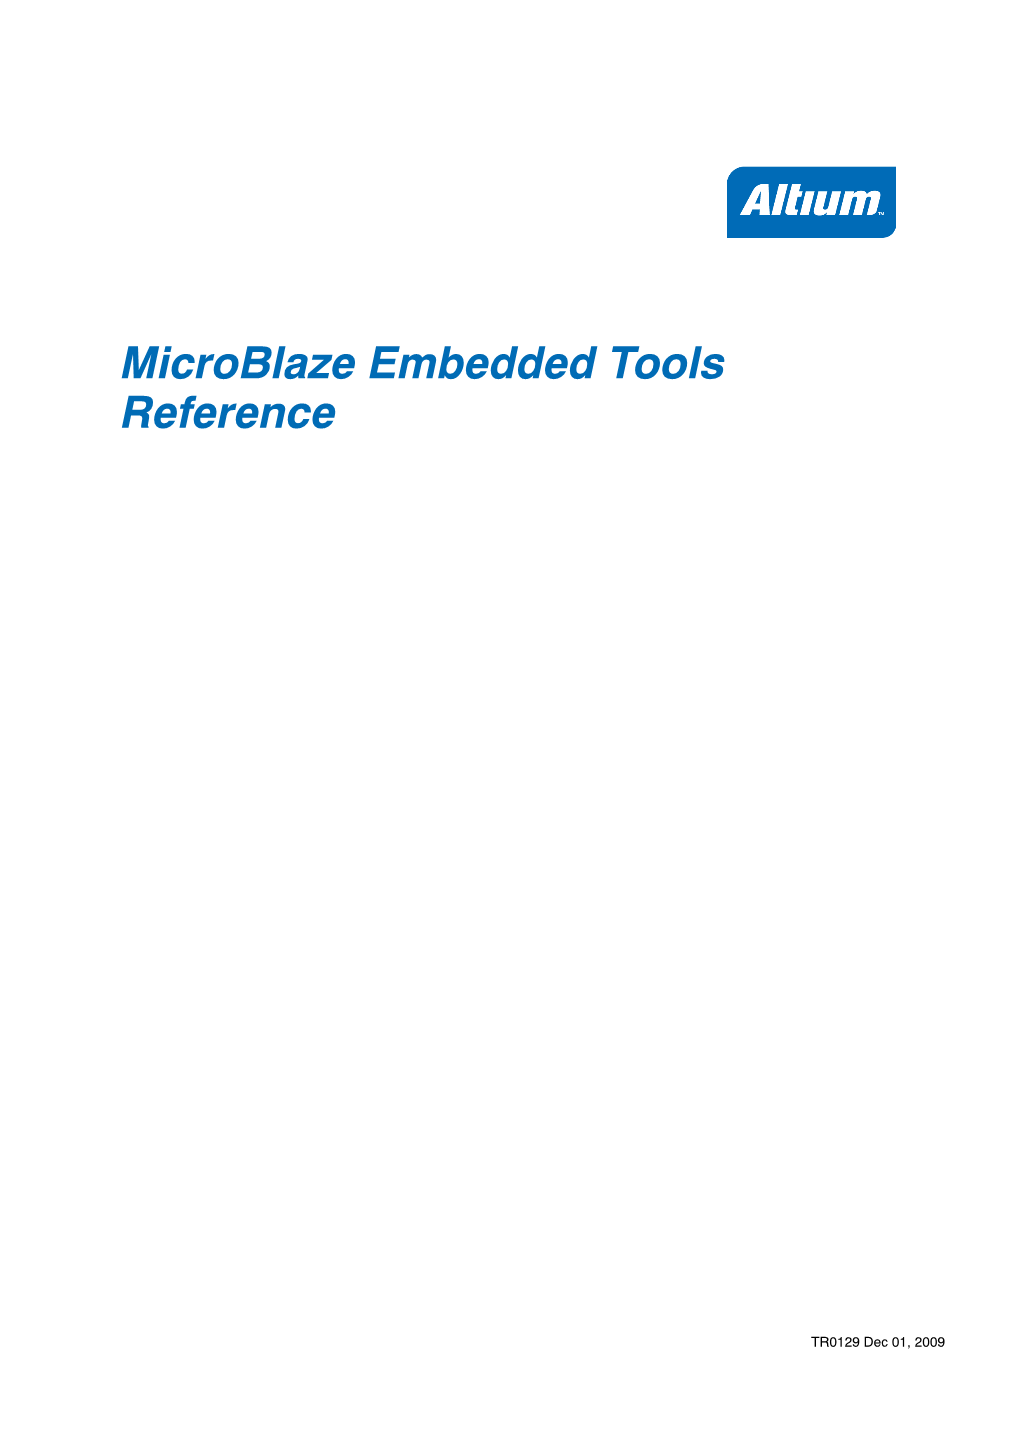 TR0129 Microblaze Embedded Tools Reference